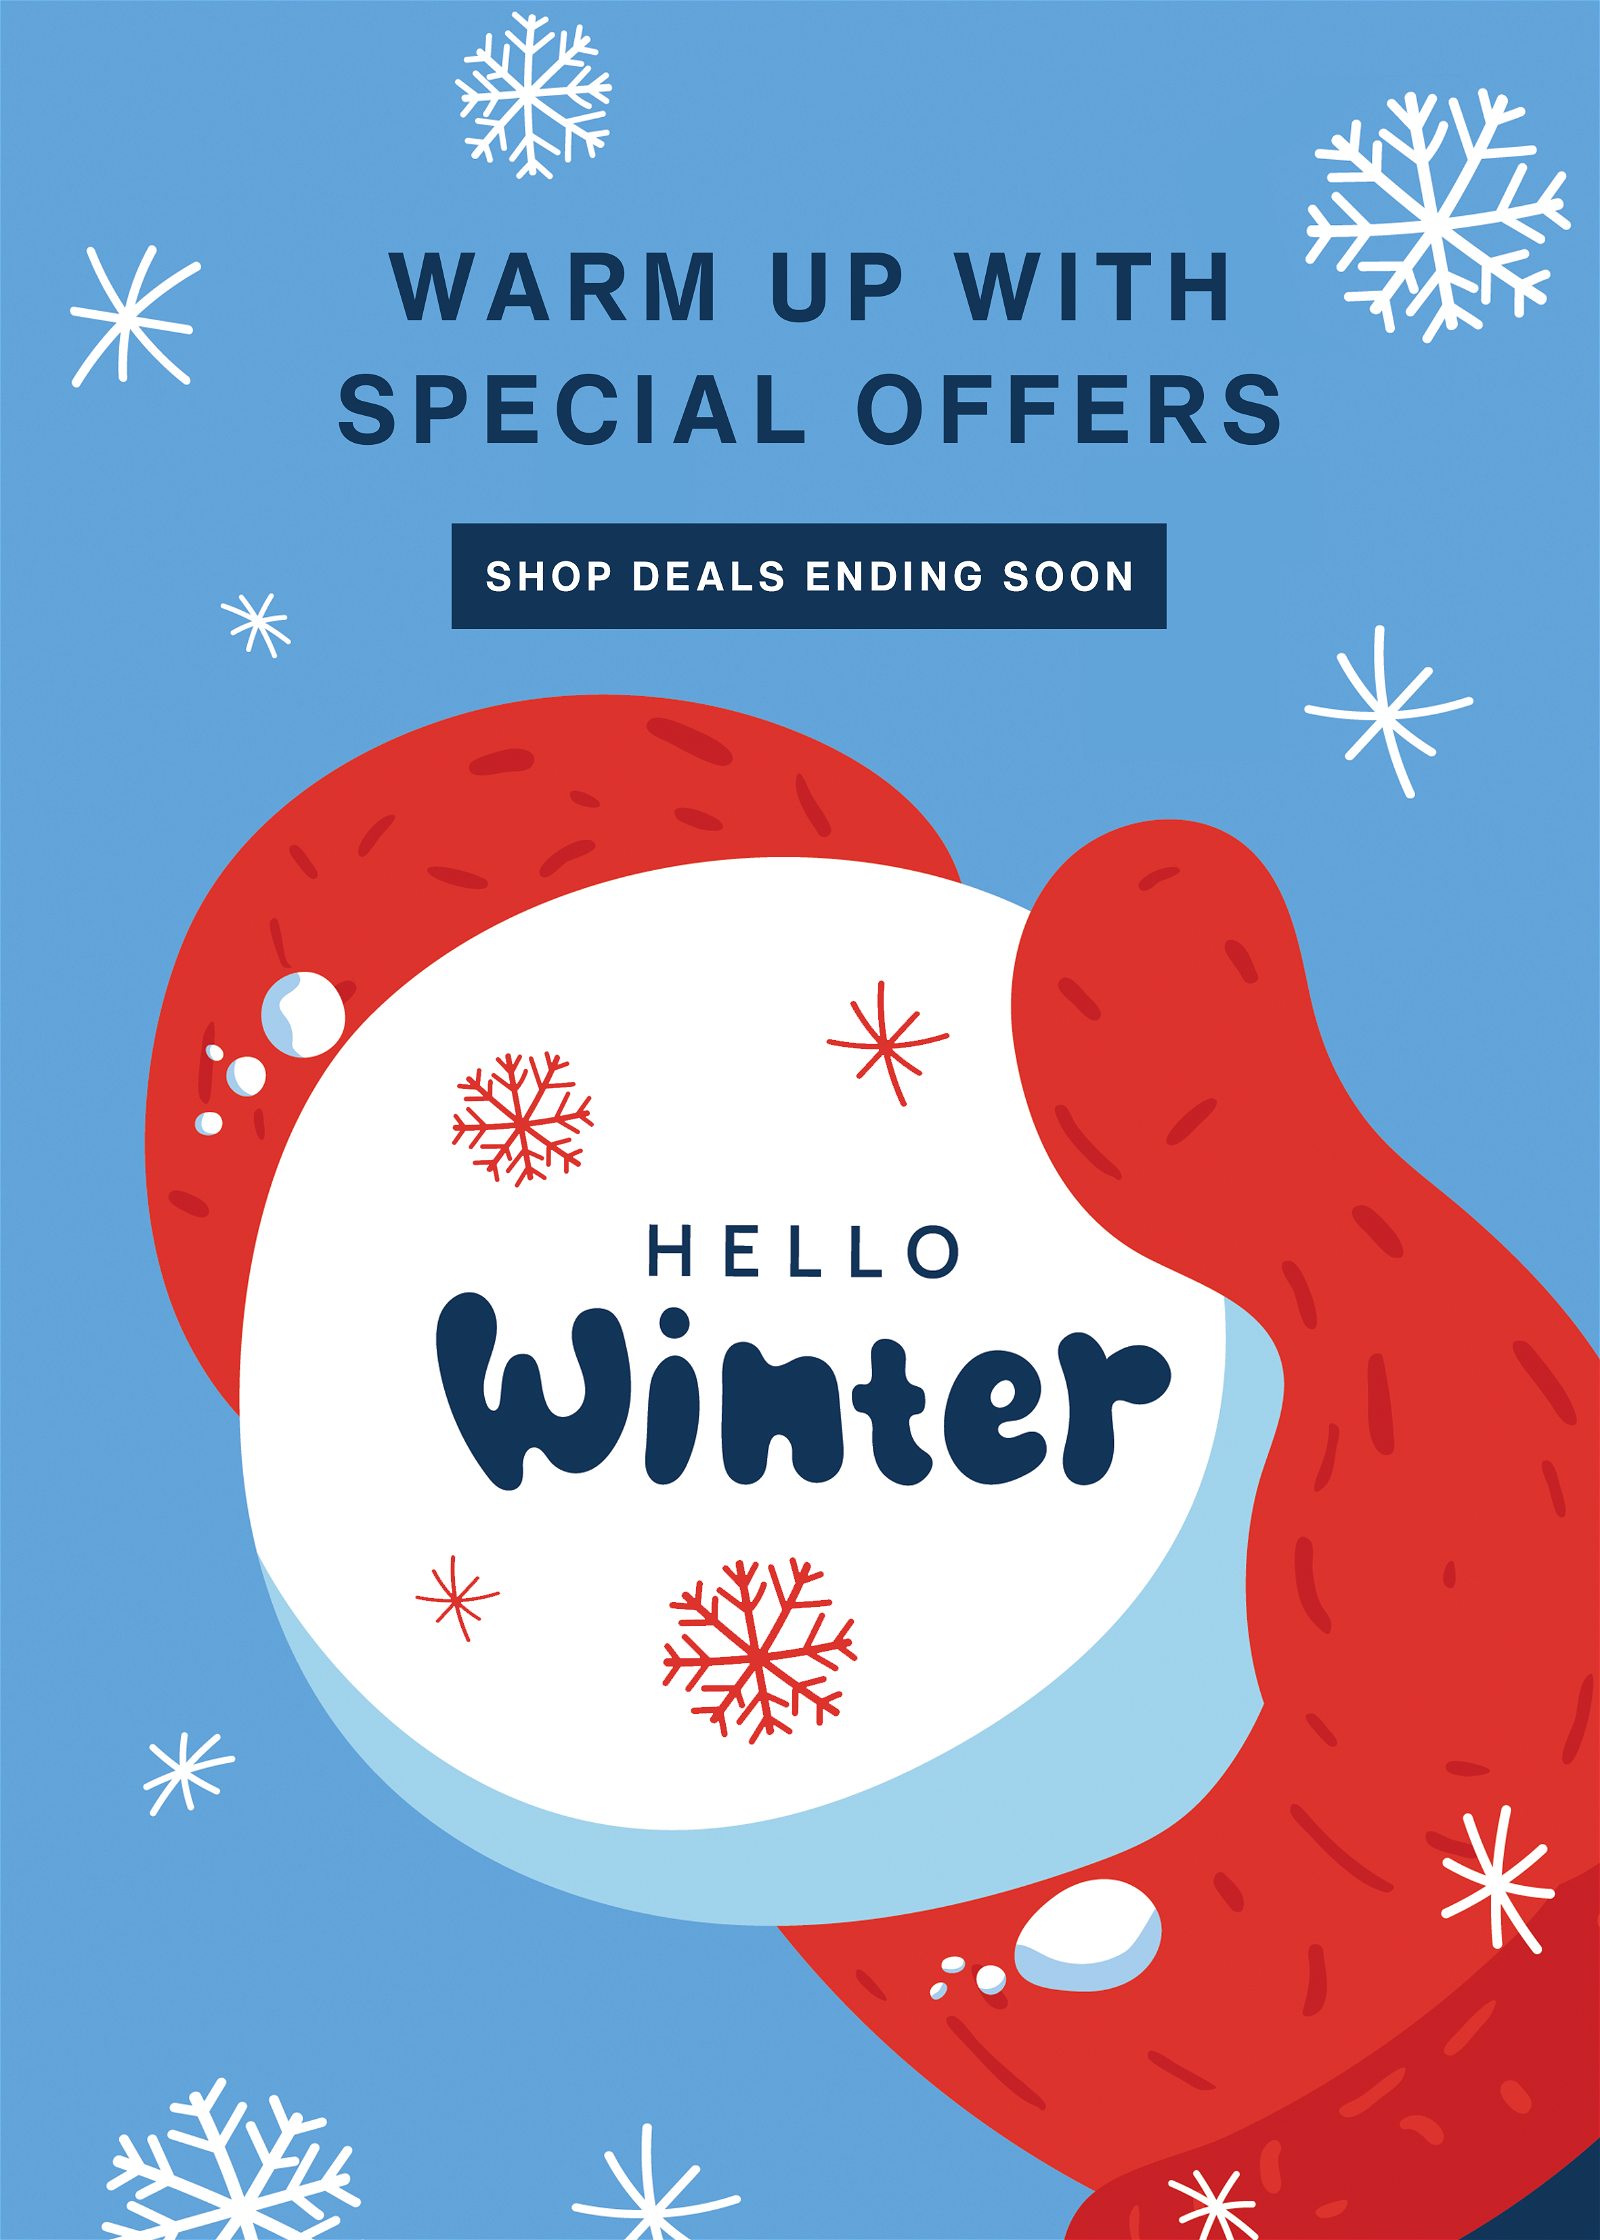 Hello Winter - Special Offers Ending Soon!